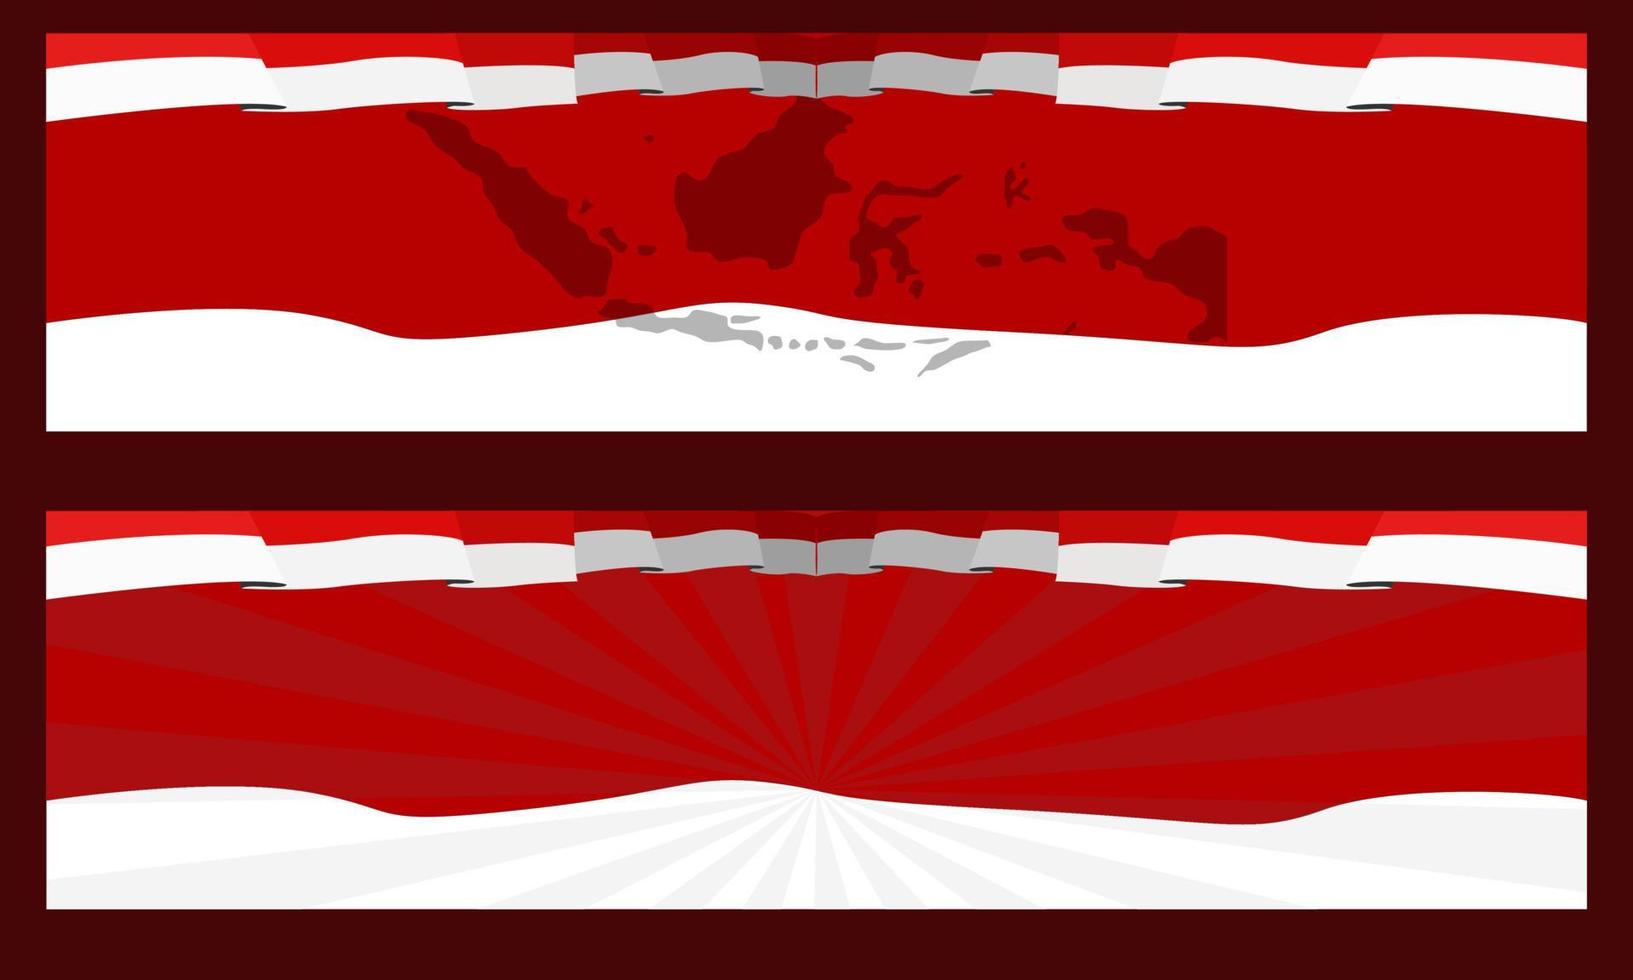 red and white banner with indonesian map and waving flag vector